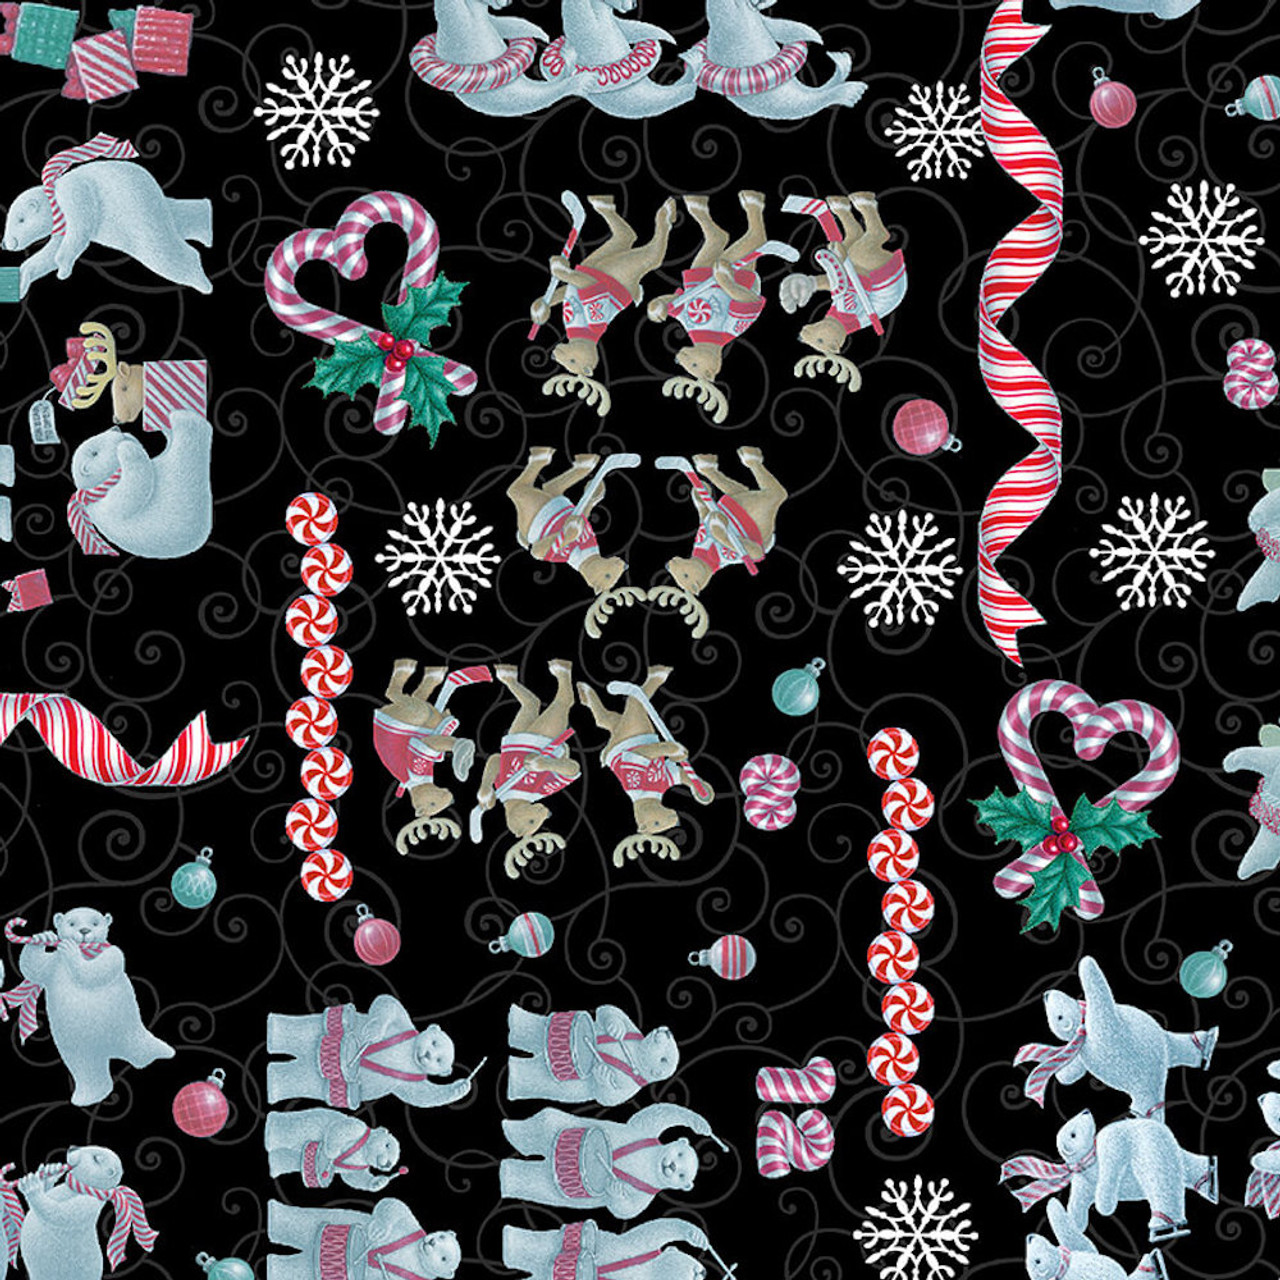 StudioE 12 Days Of Christmas Patchwork Black Cotton Fabric By The Yard